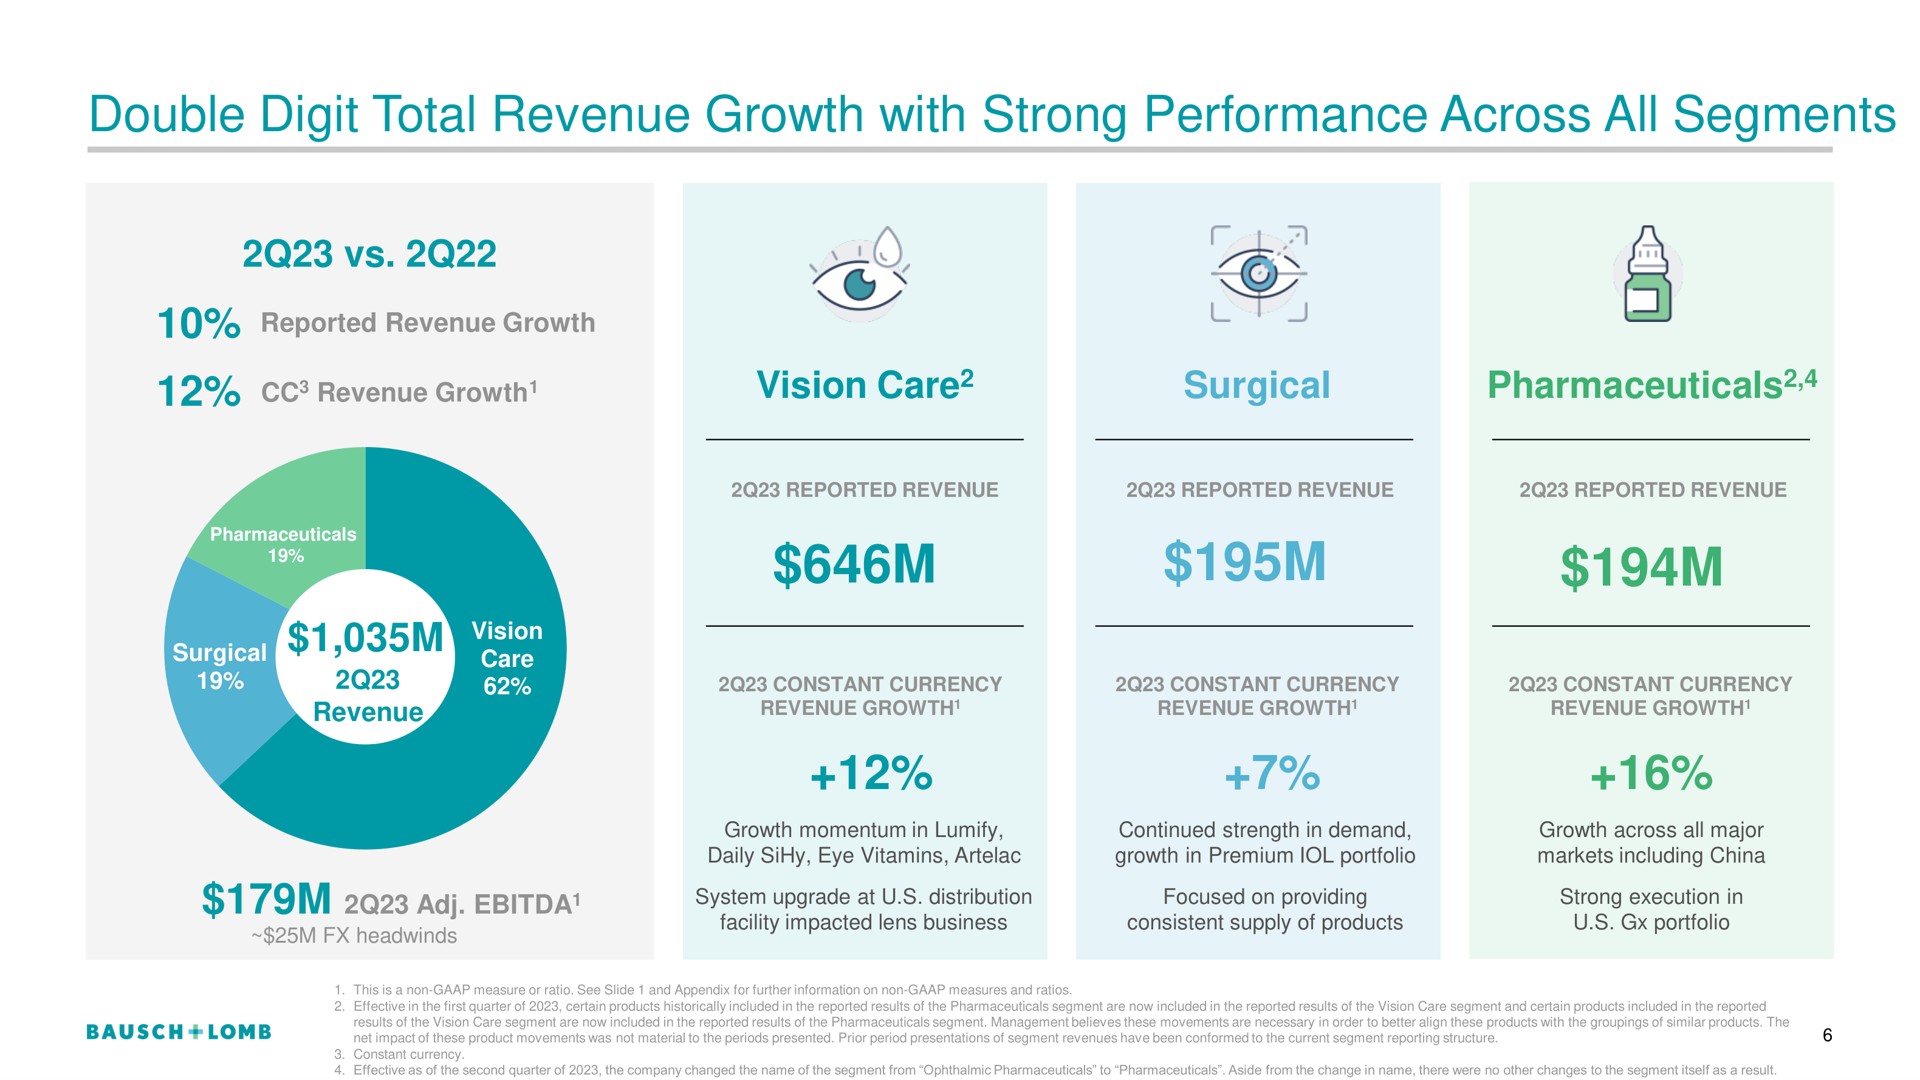 double digit total revenue growth with strong performance across all segments | Bausch+Lomb